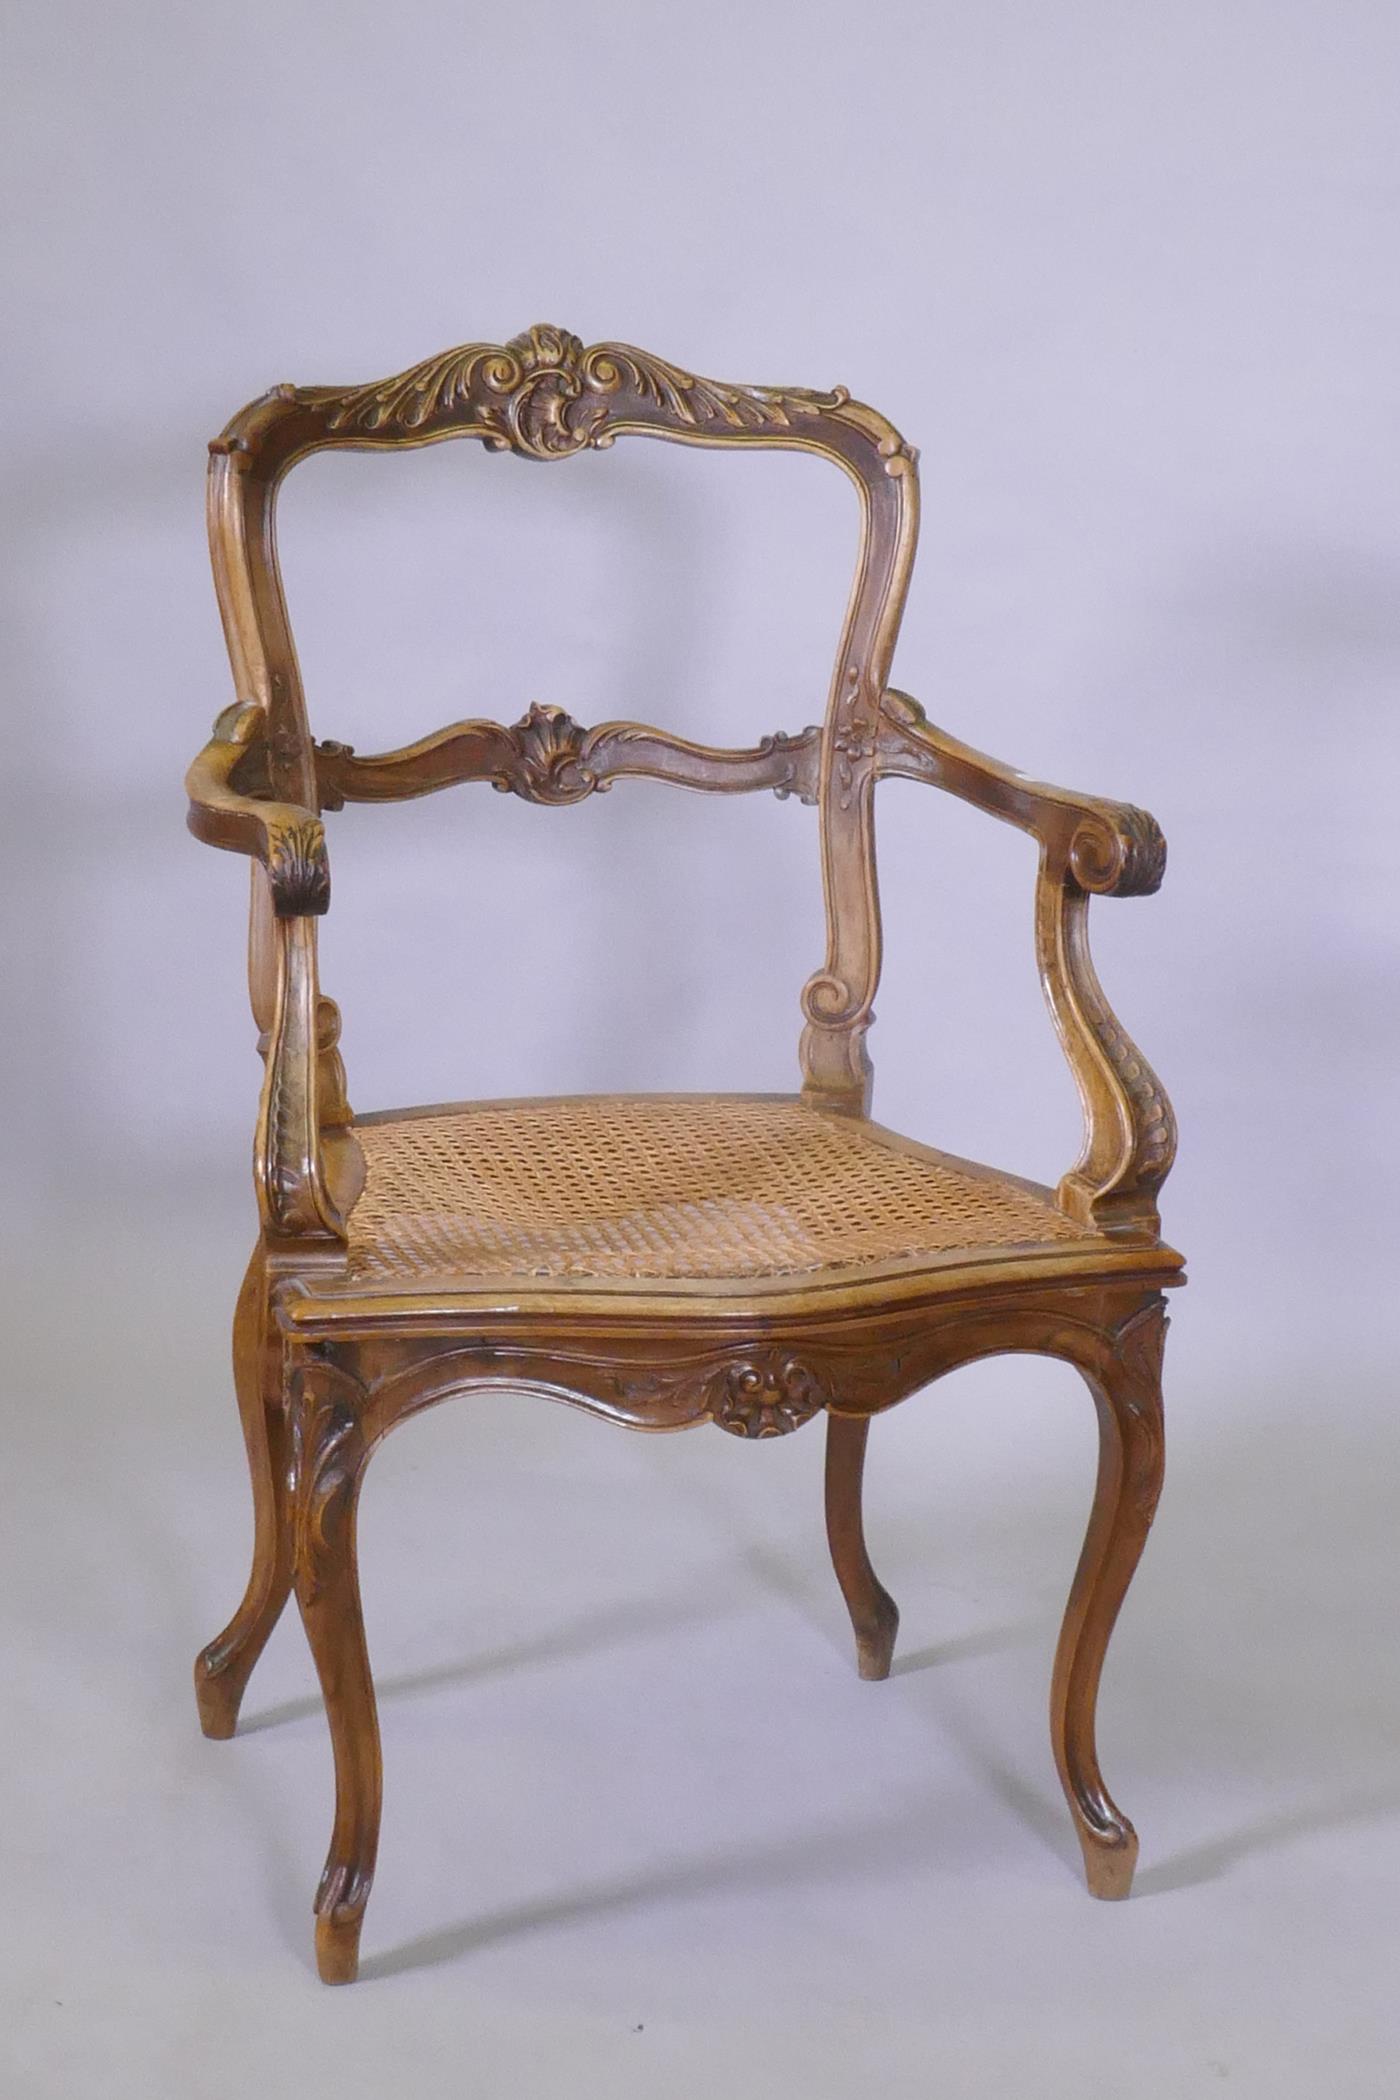 A C19th French carved walnut open arm chair with caned seat